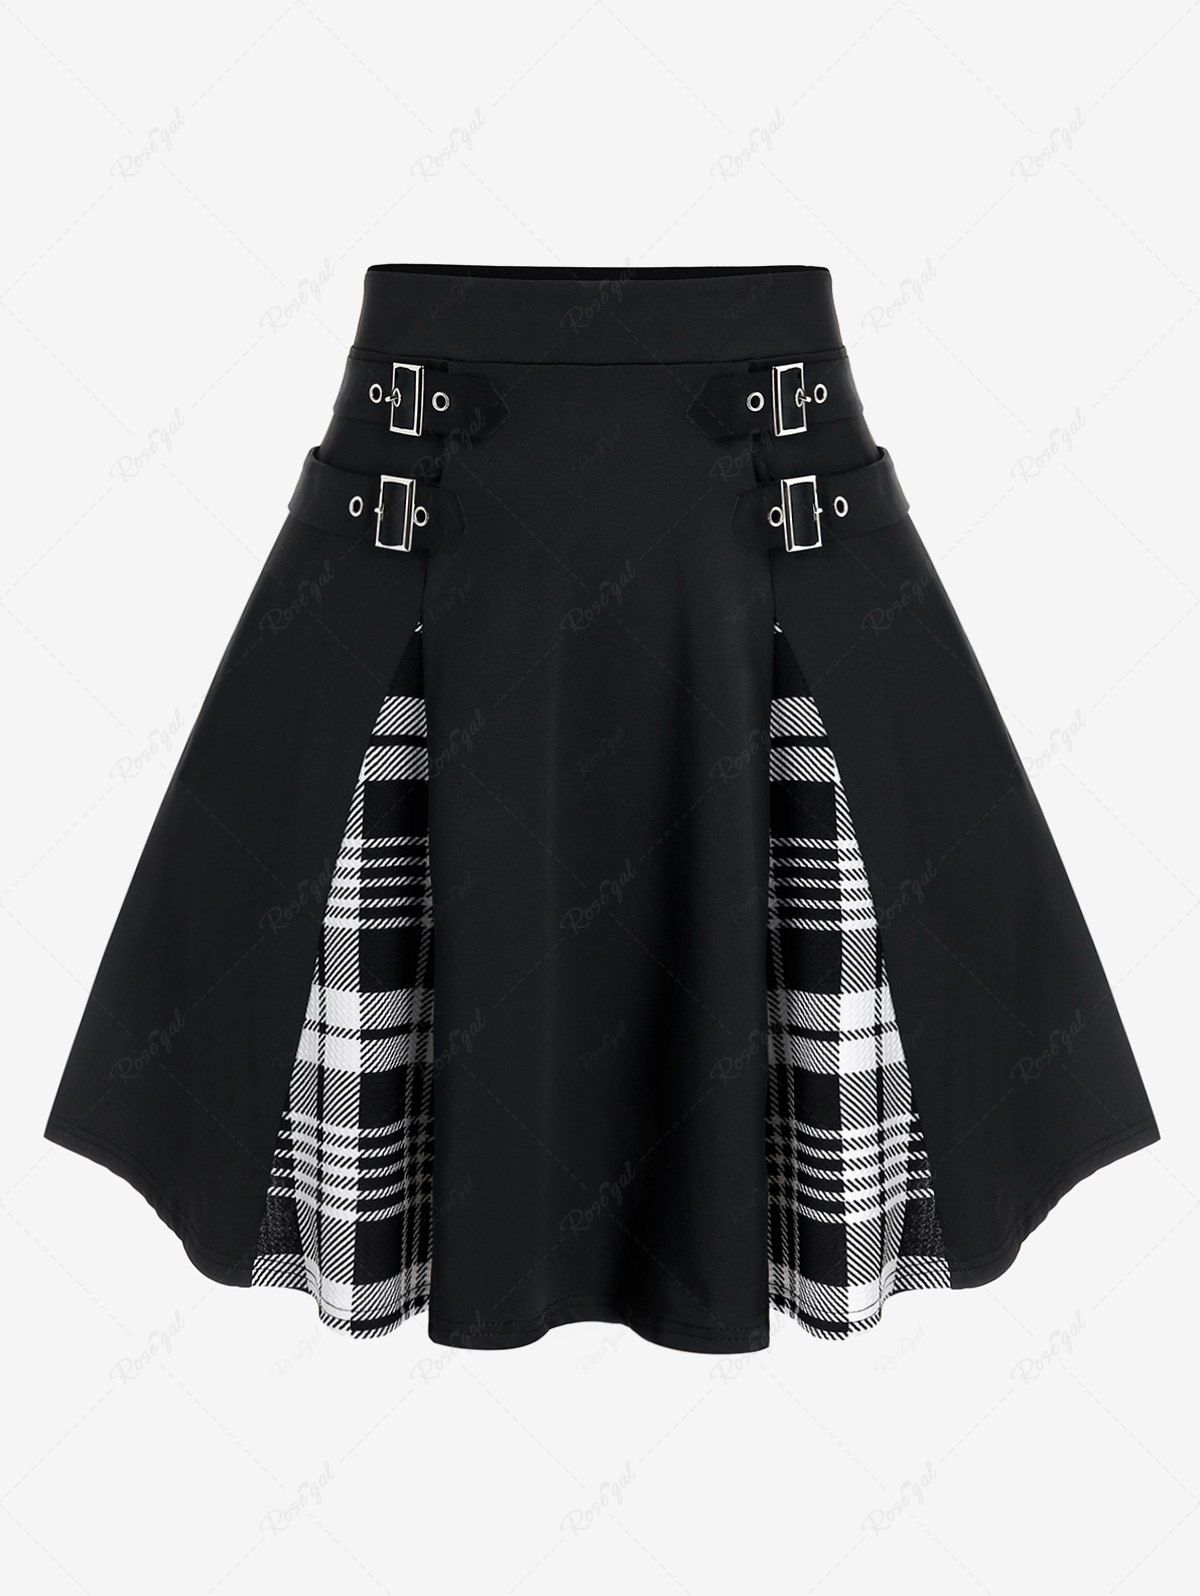 New Plus Size Gothic Plaid Buckles High Waisted A Line Mini Skirt  